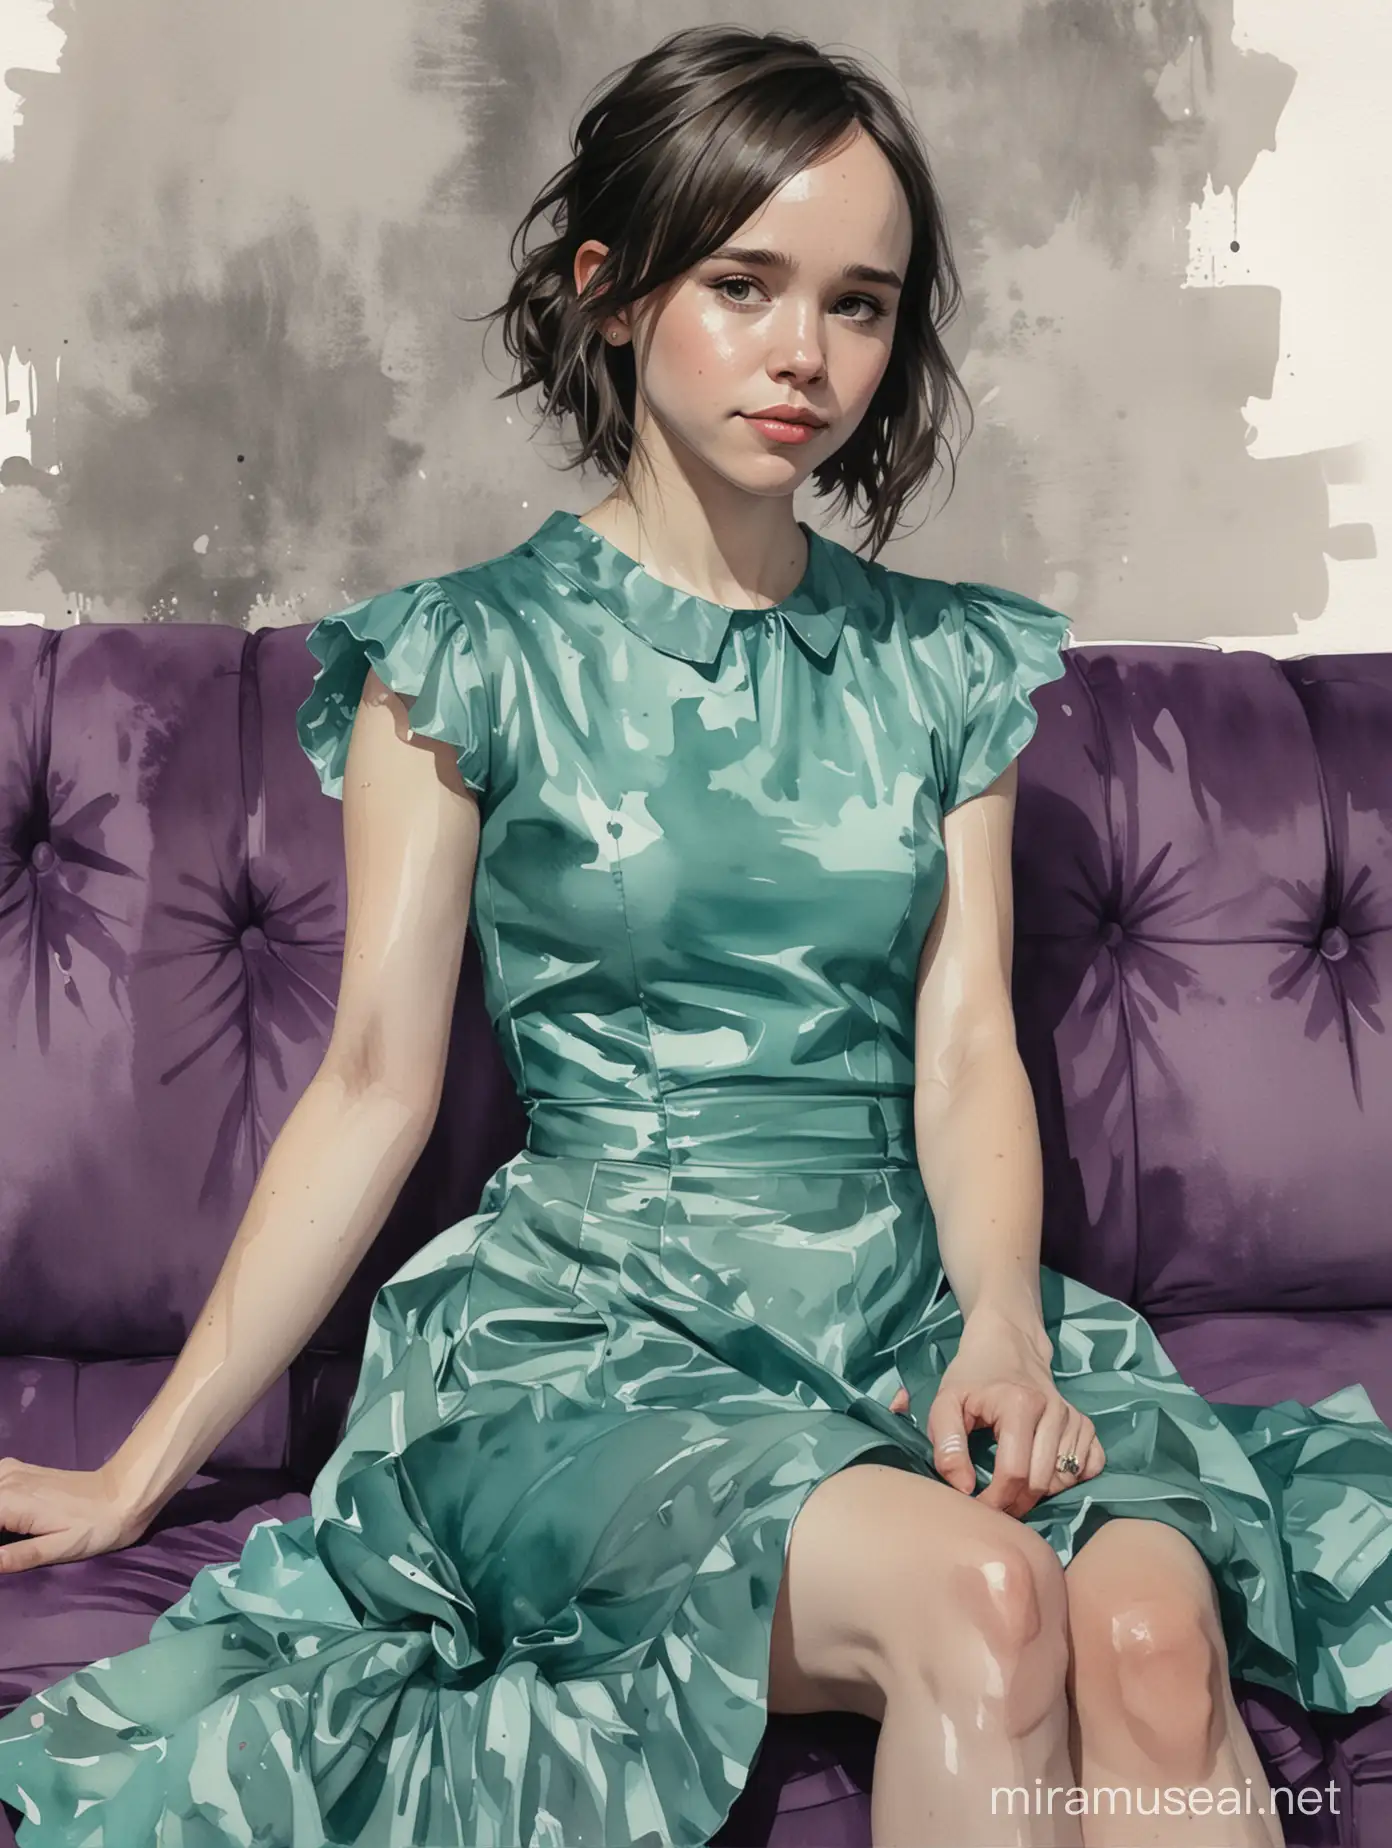 Alex Maleev's illustration depicting alluring smirking young Ellen Page wearing a teal party dress sitting on a couch with small purple baby dragon, watercolor,  no distortion, no makeup, gray palette, insanely high  detail, very high quality, seen from behind, low angle view